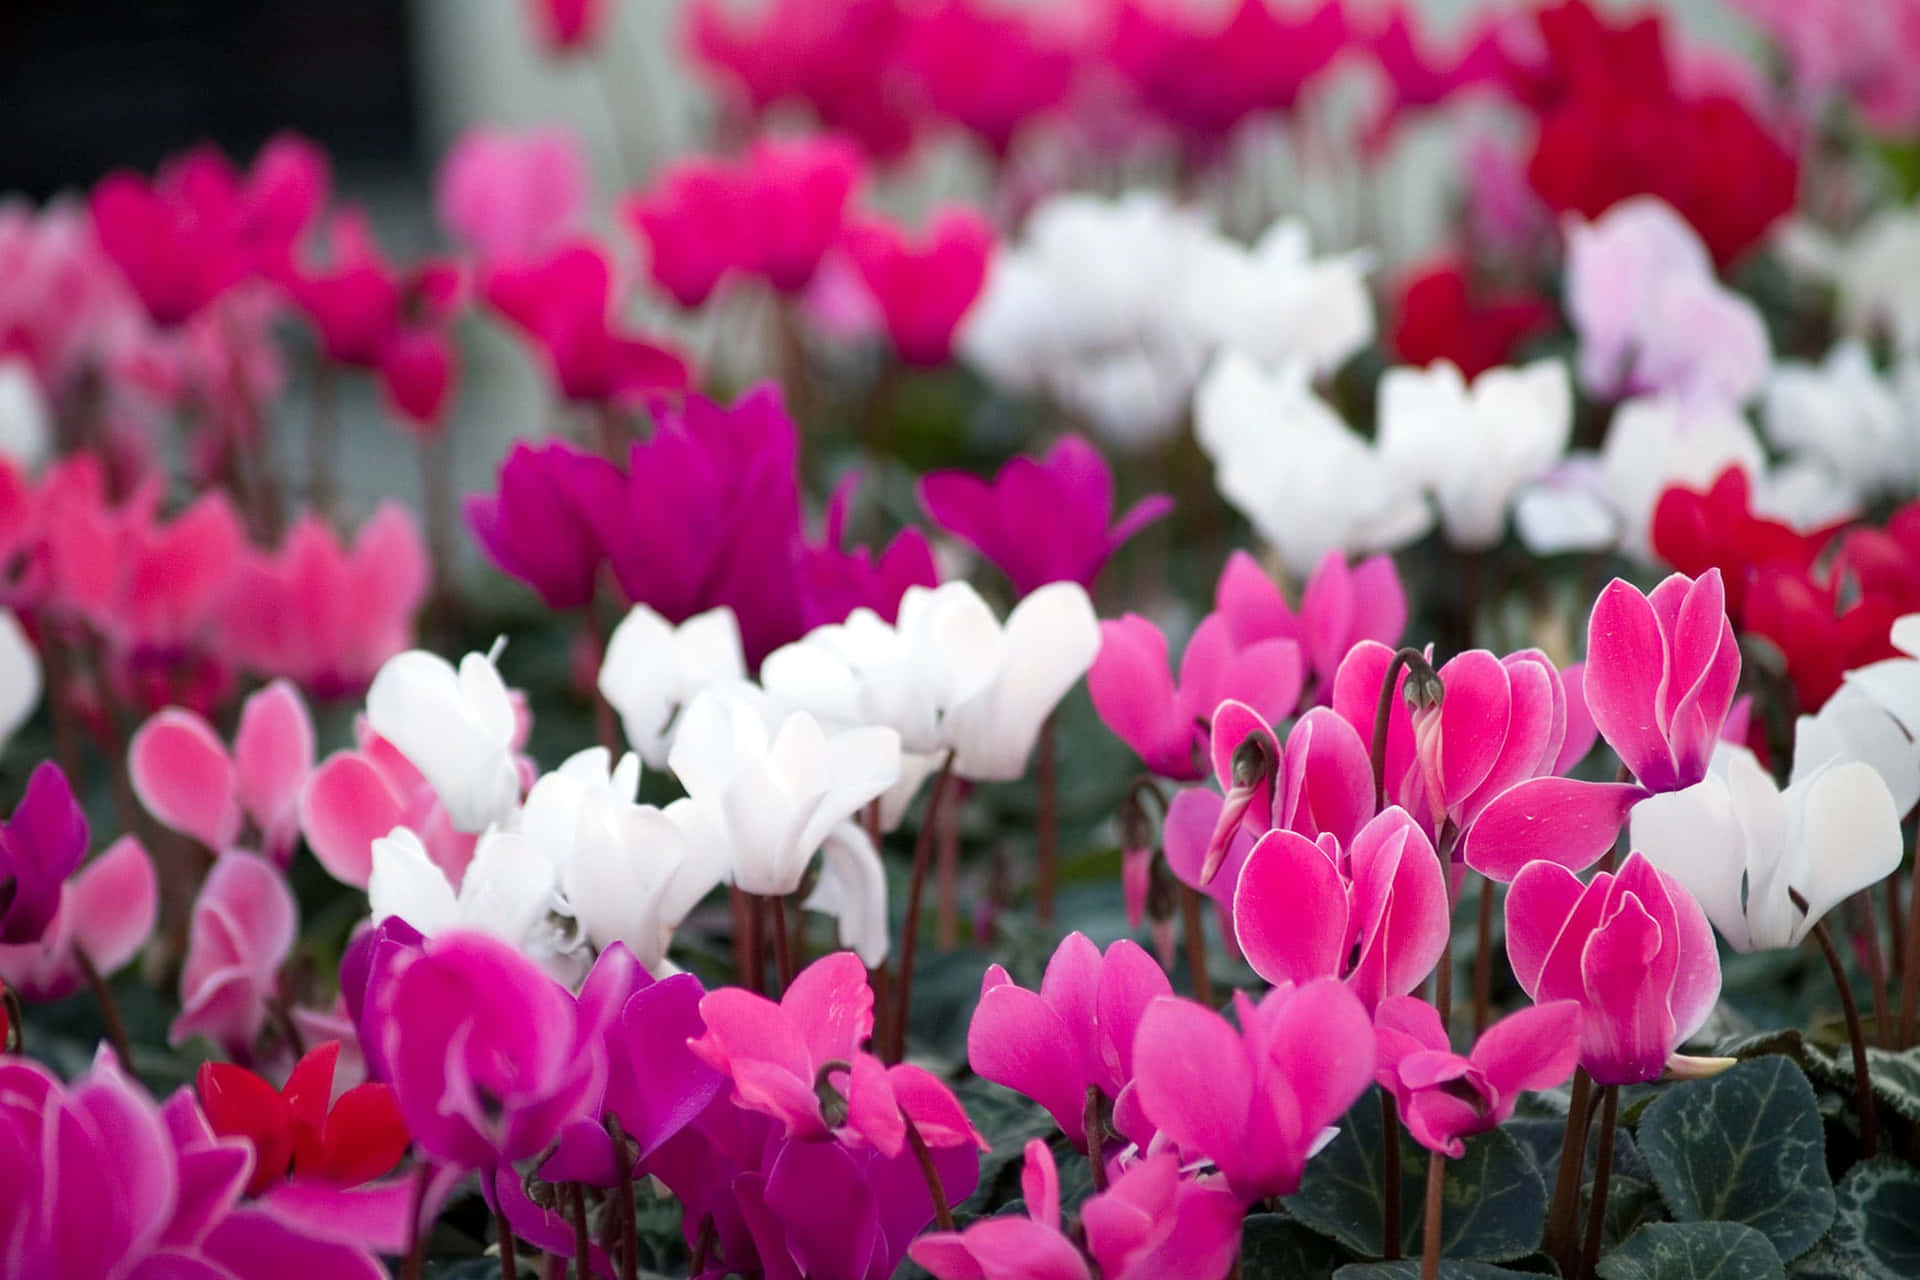 A Group Of Pink And White Flowers In A Garden